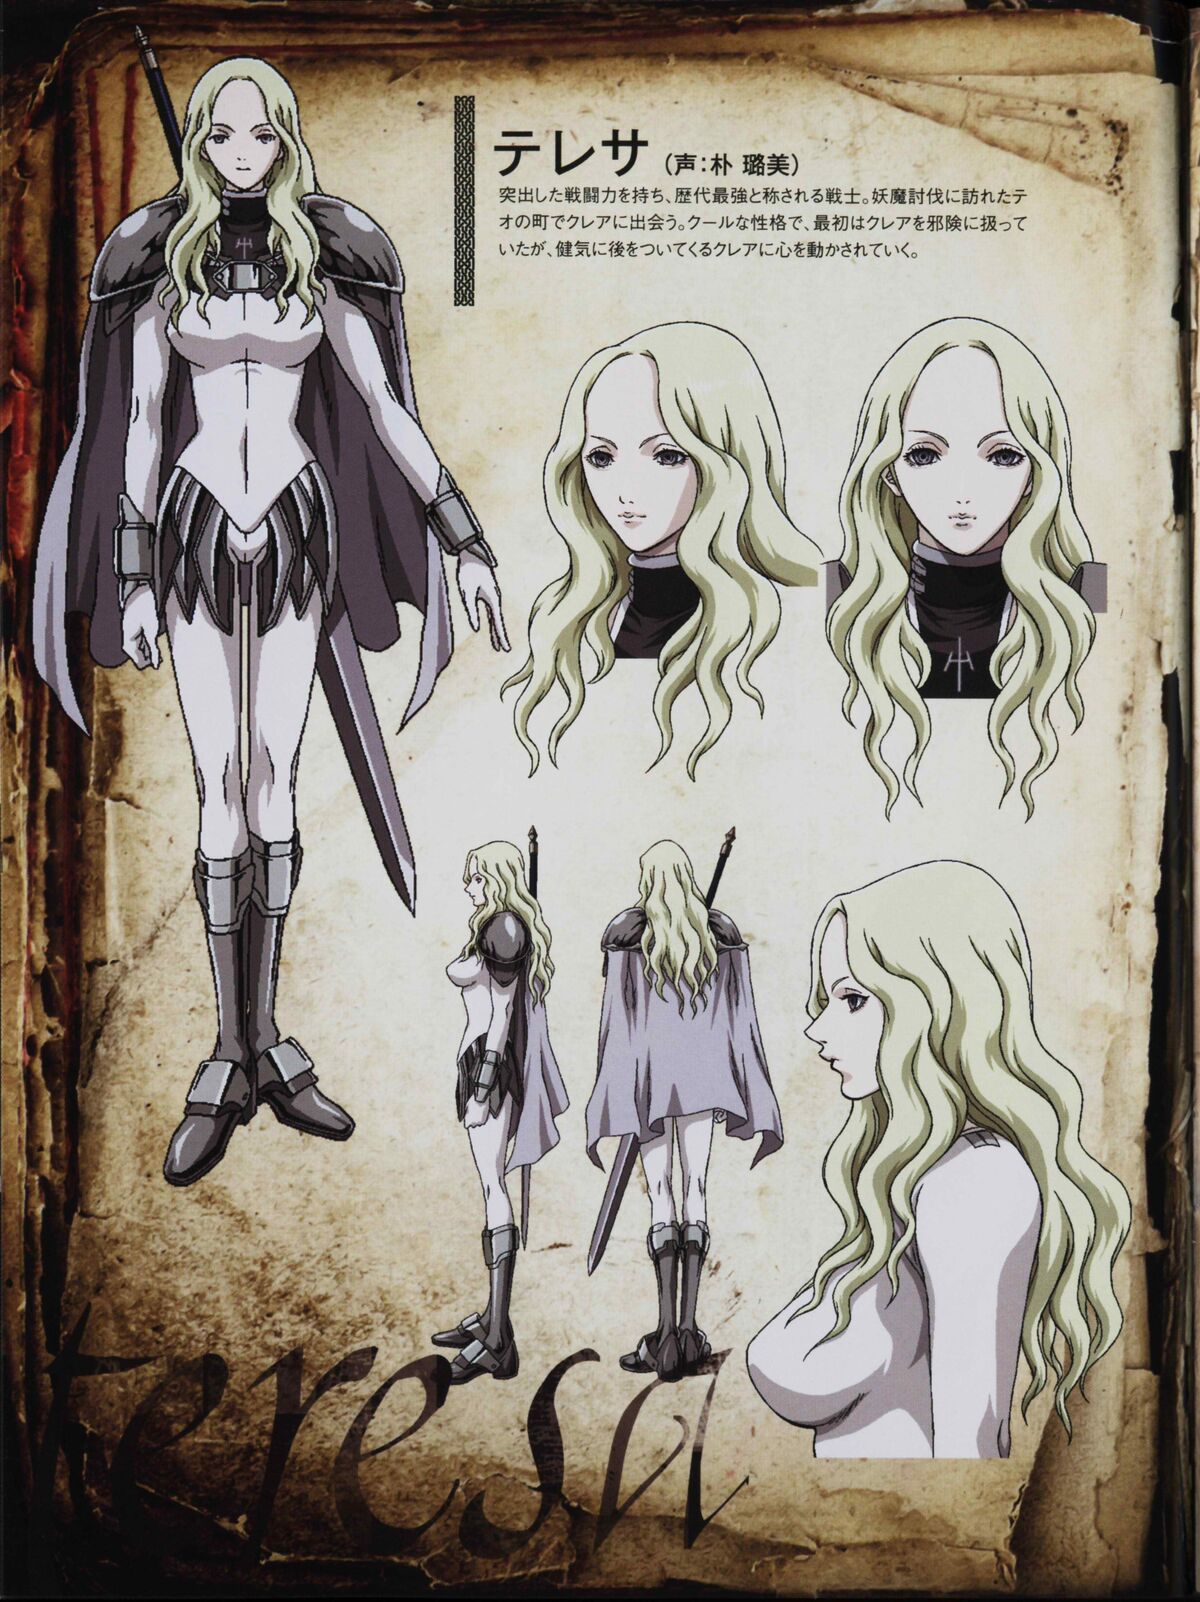 Anime Review: Claymore – The Demented Ferrets